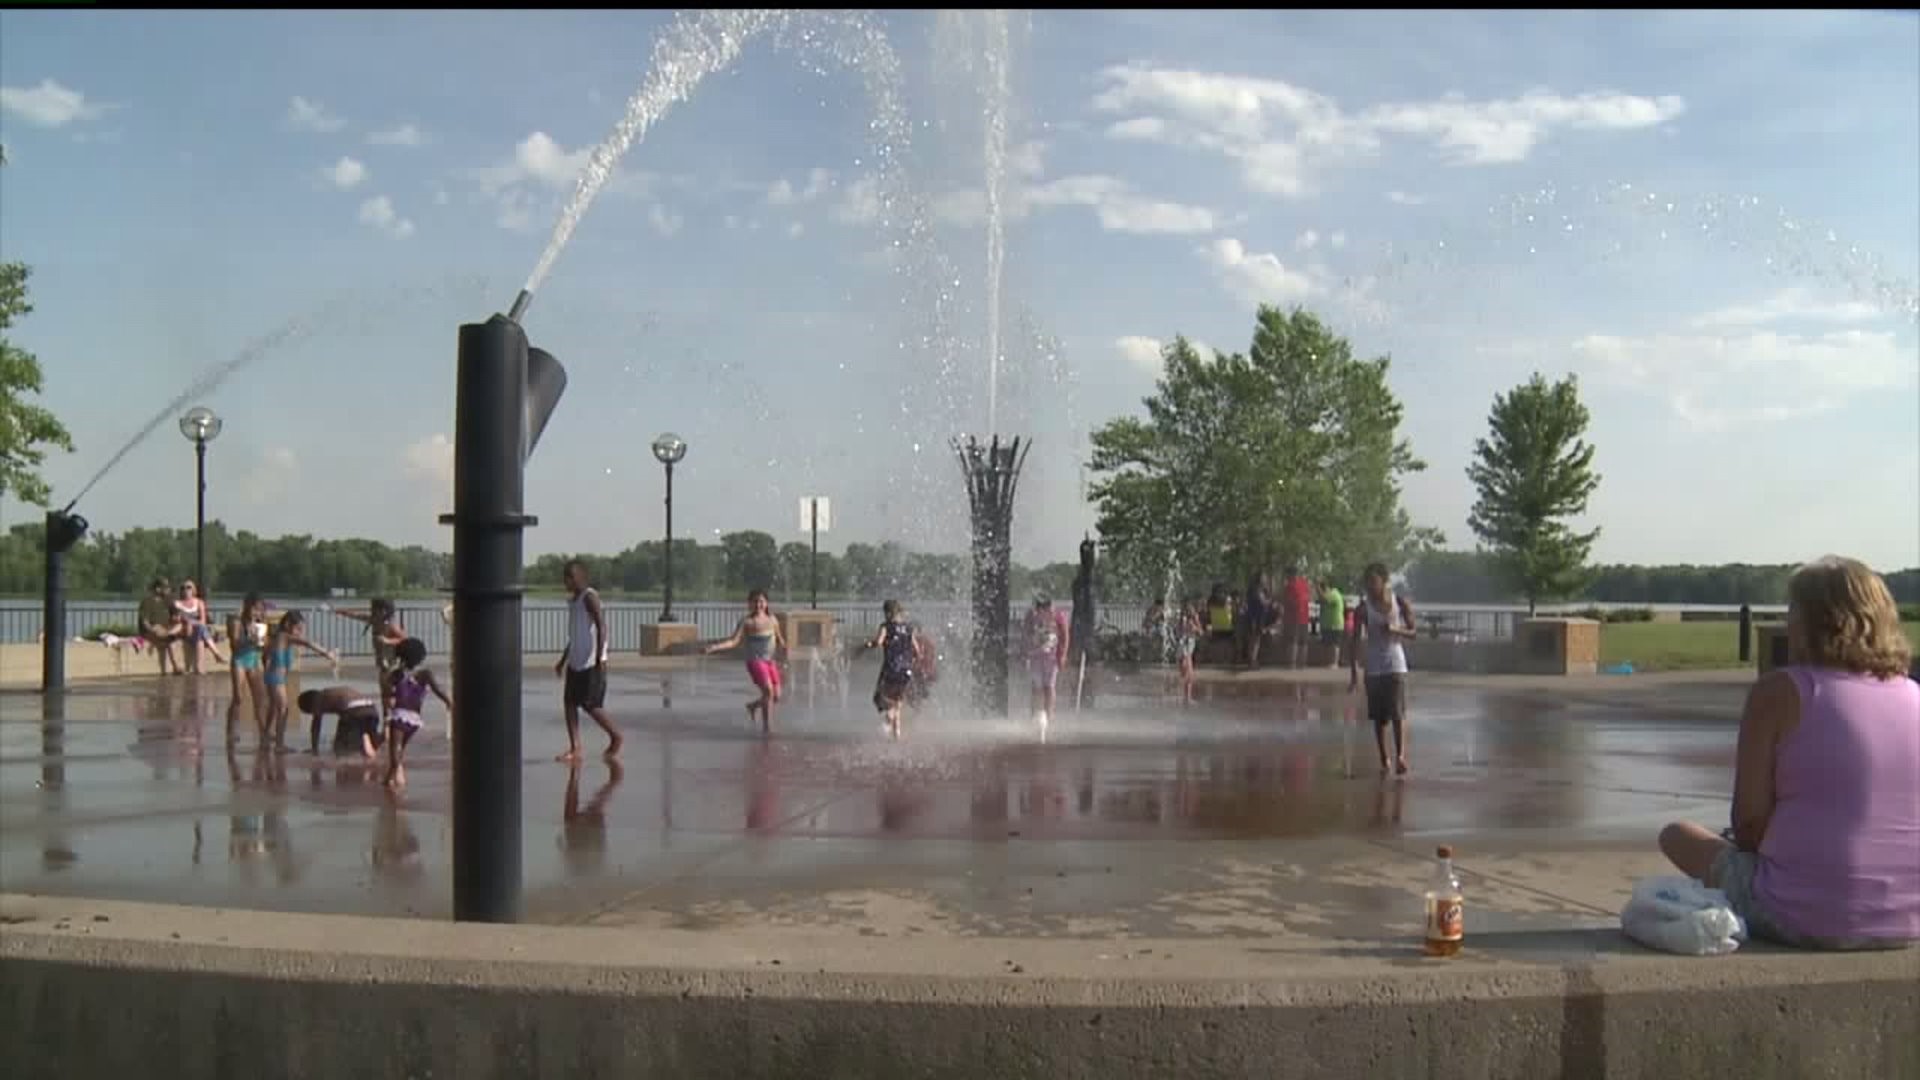 Muscatine getting its "Mississippi Mist" fountain back up and running